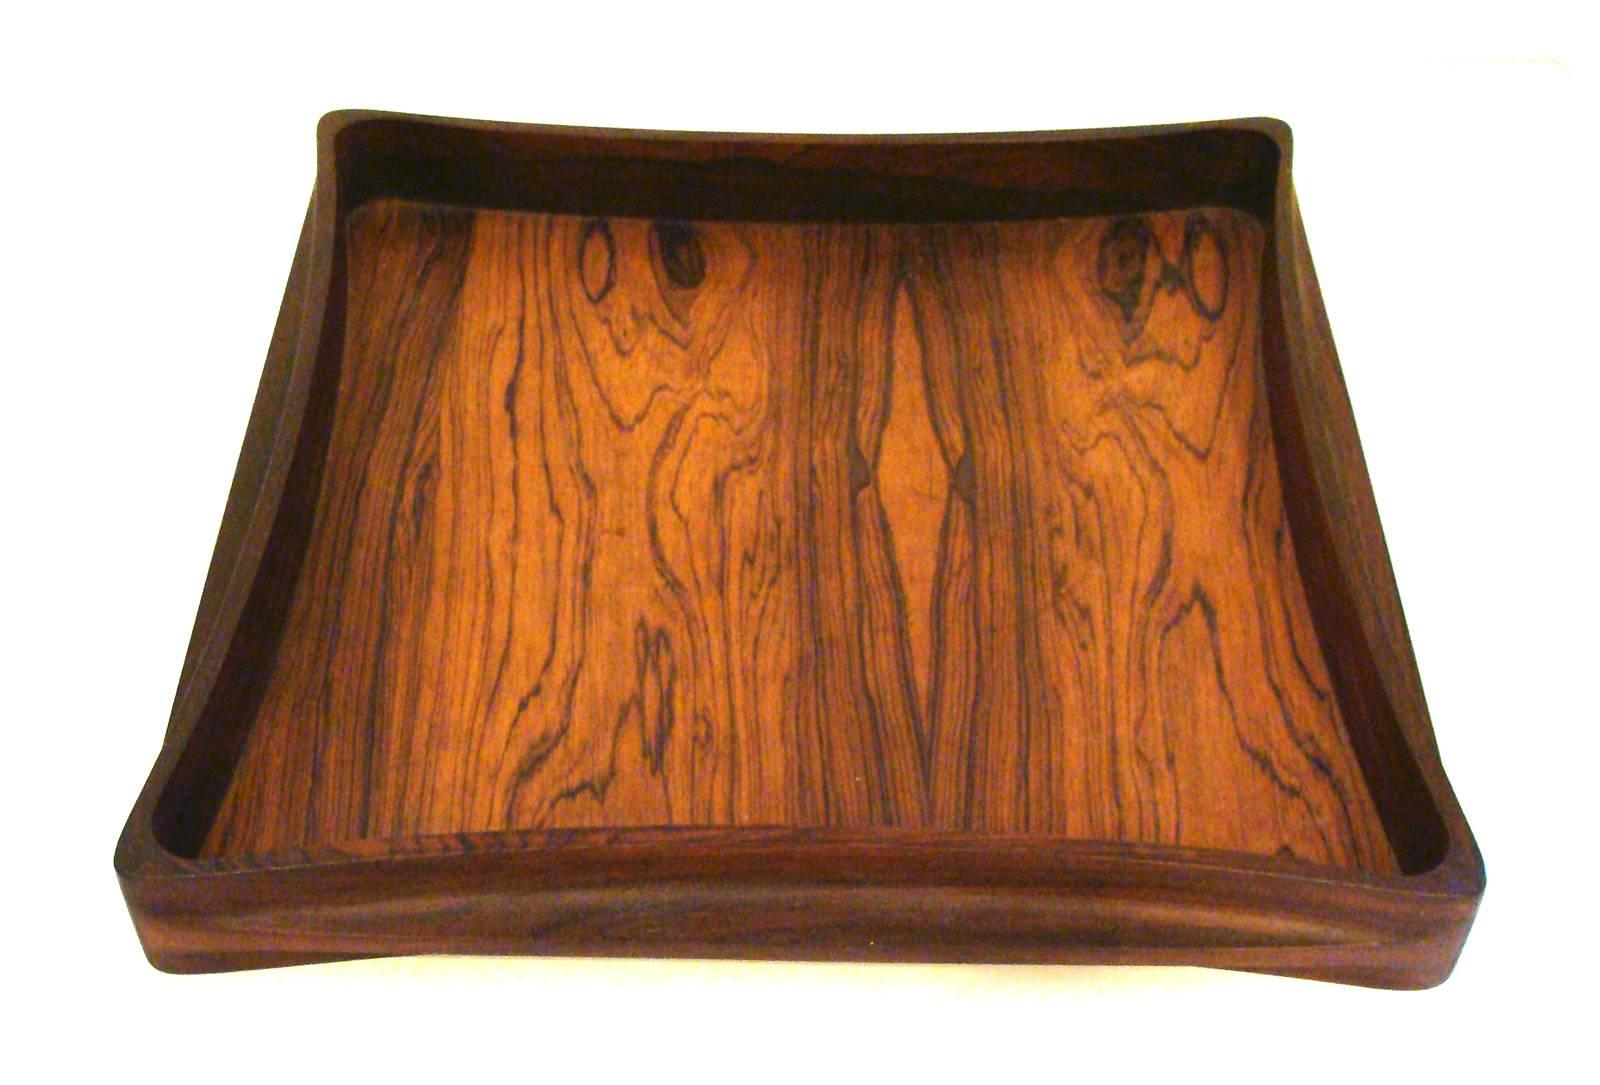 Vintage Jens Quistgaard design. Sculpted or molded structure in Brazilian rosewood. Possibly a unique design in superb original condition. Incised
Dansk/Denmark/IHQ on underside of tray.

Provenance: From estate of Lou Dorfsman, former head of